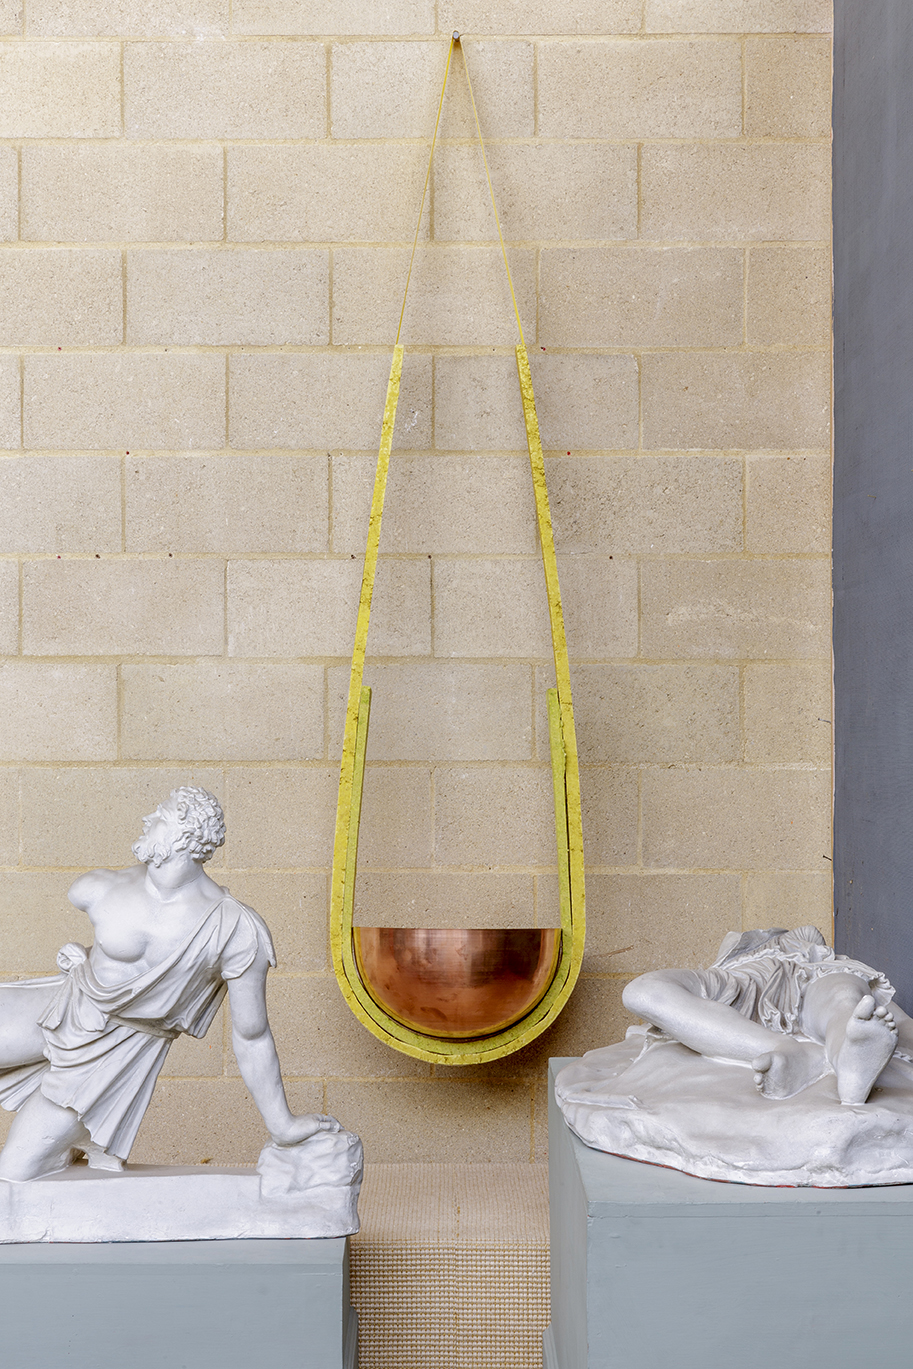 copper bowl hanging from yellow tape against breeze block wall behind two reclining plaster casts